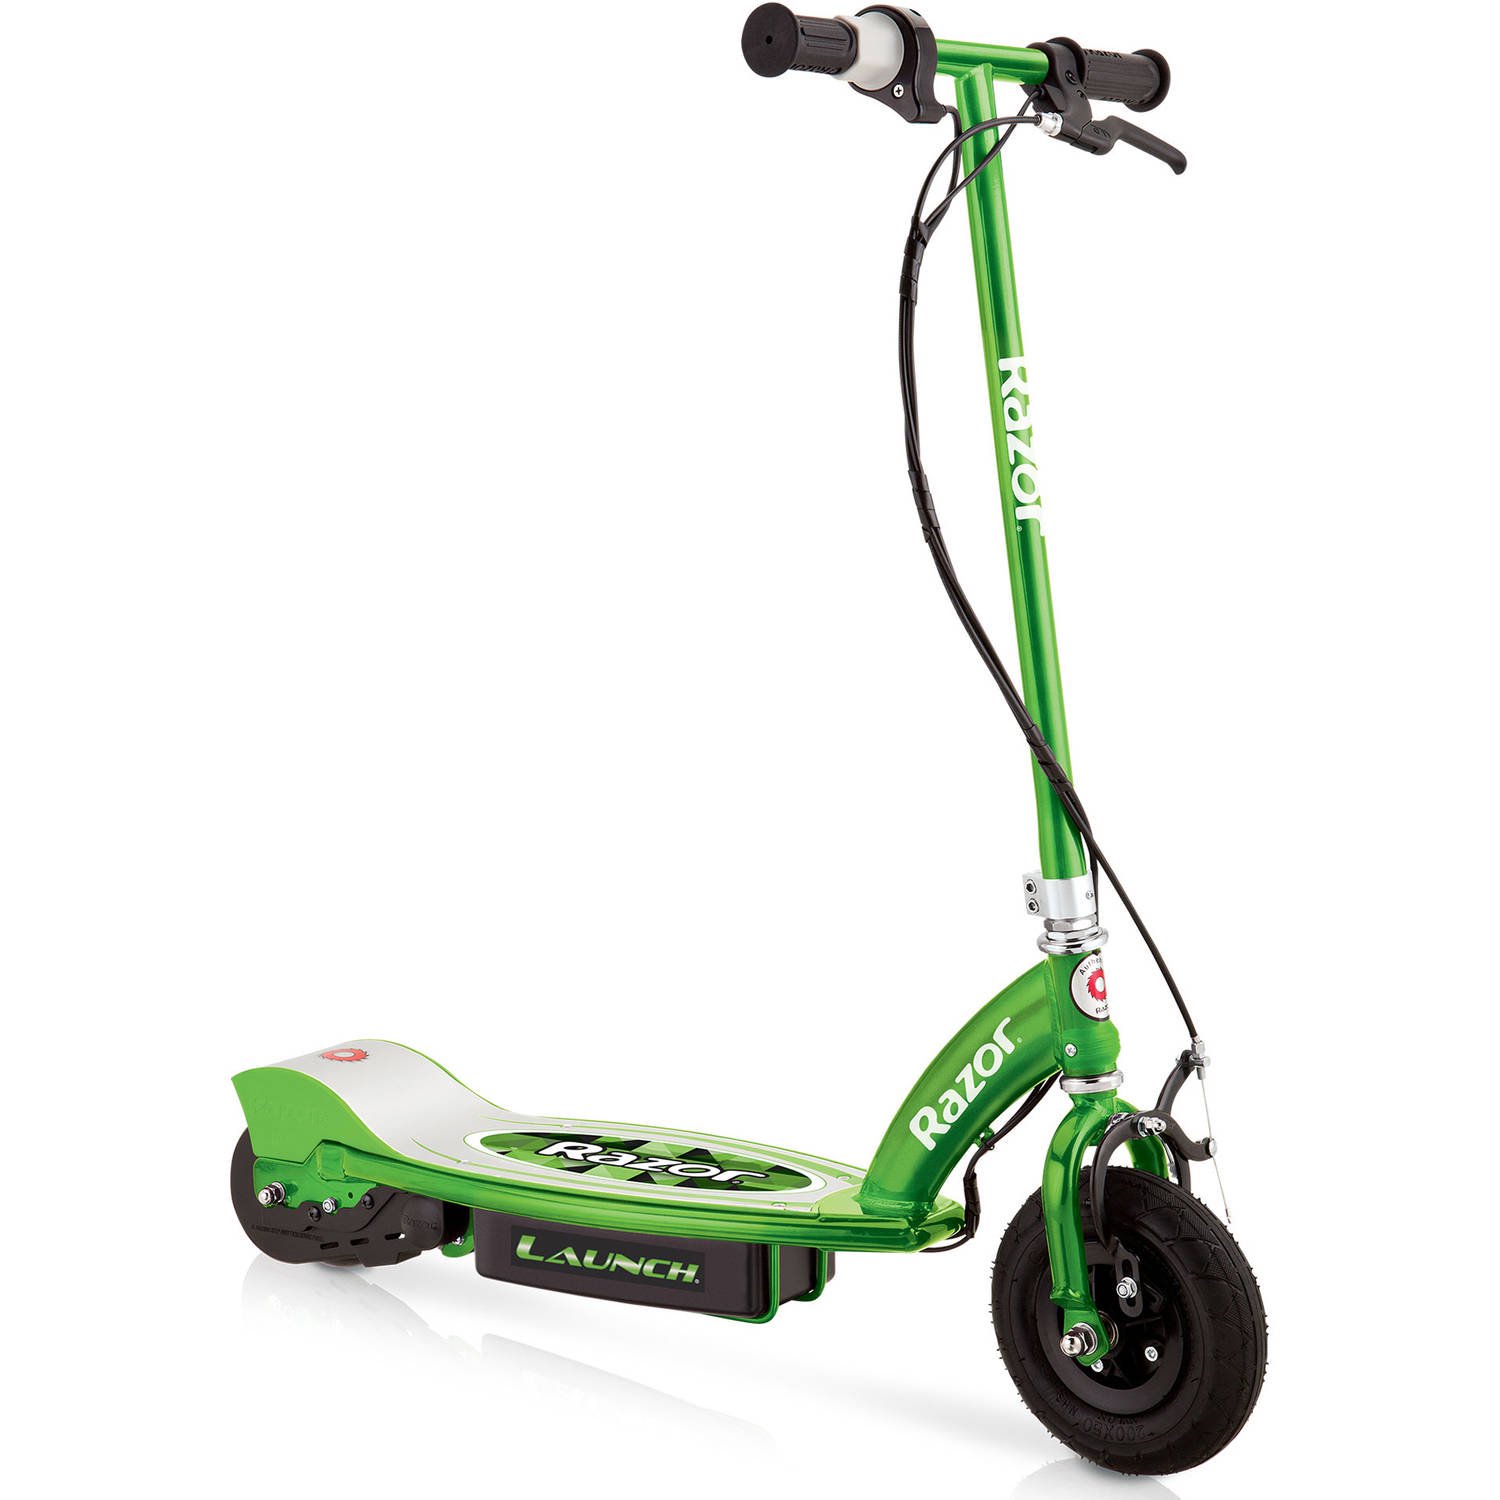 Razor E100 Kids Ride On 24V Motorized Powered Electric Scooter Toy, Green - image 1 of 10